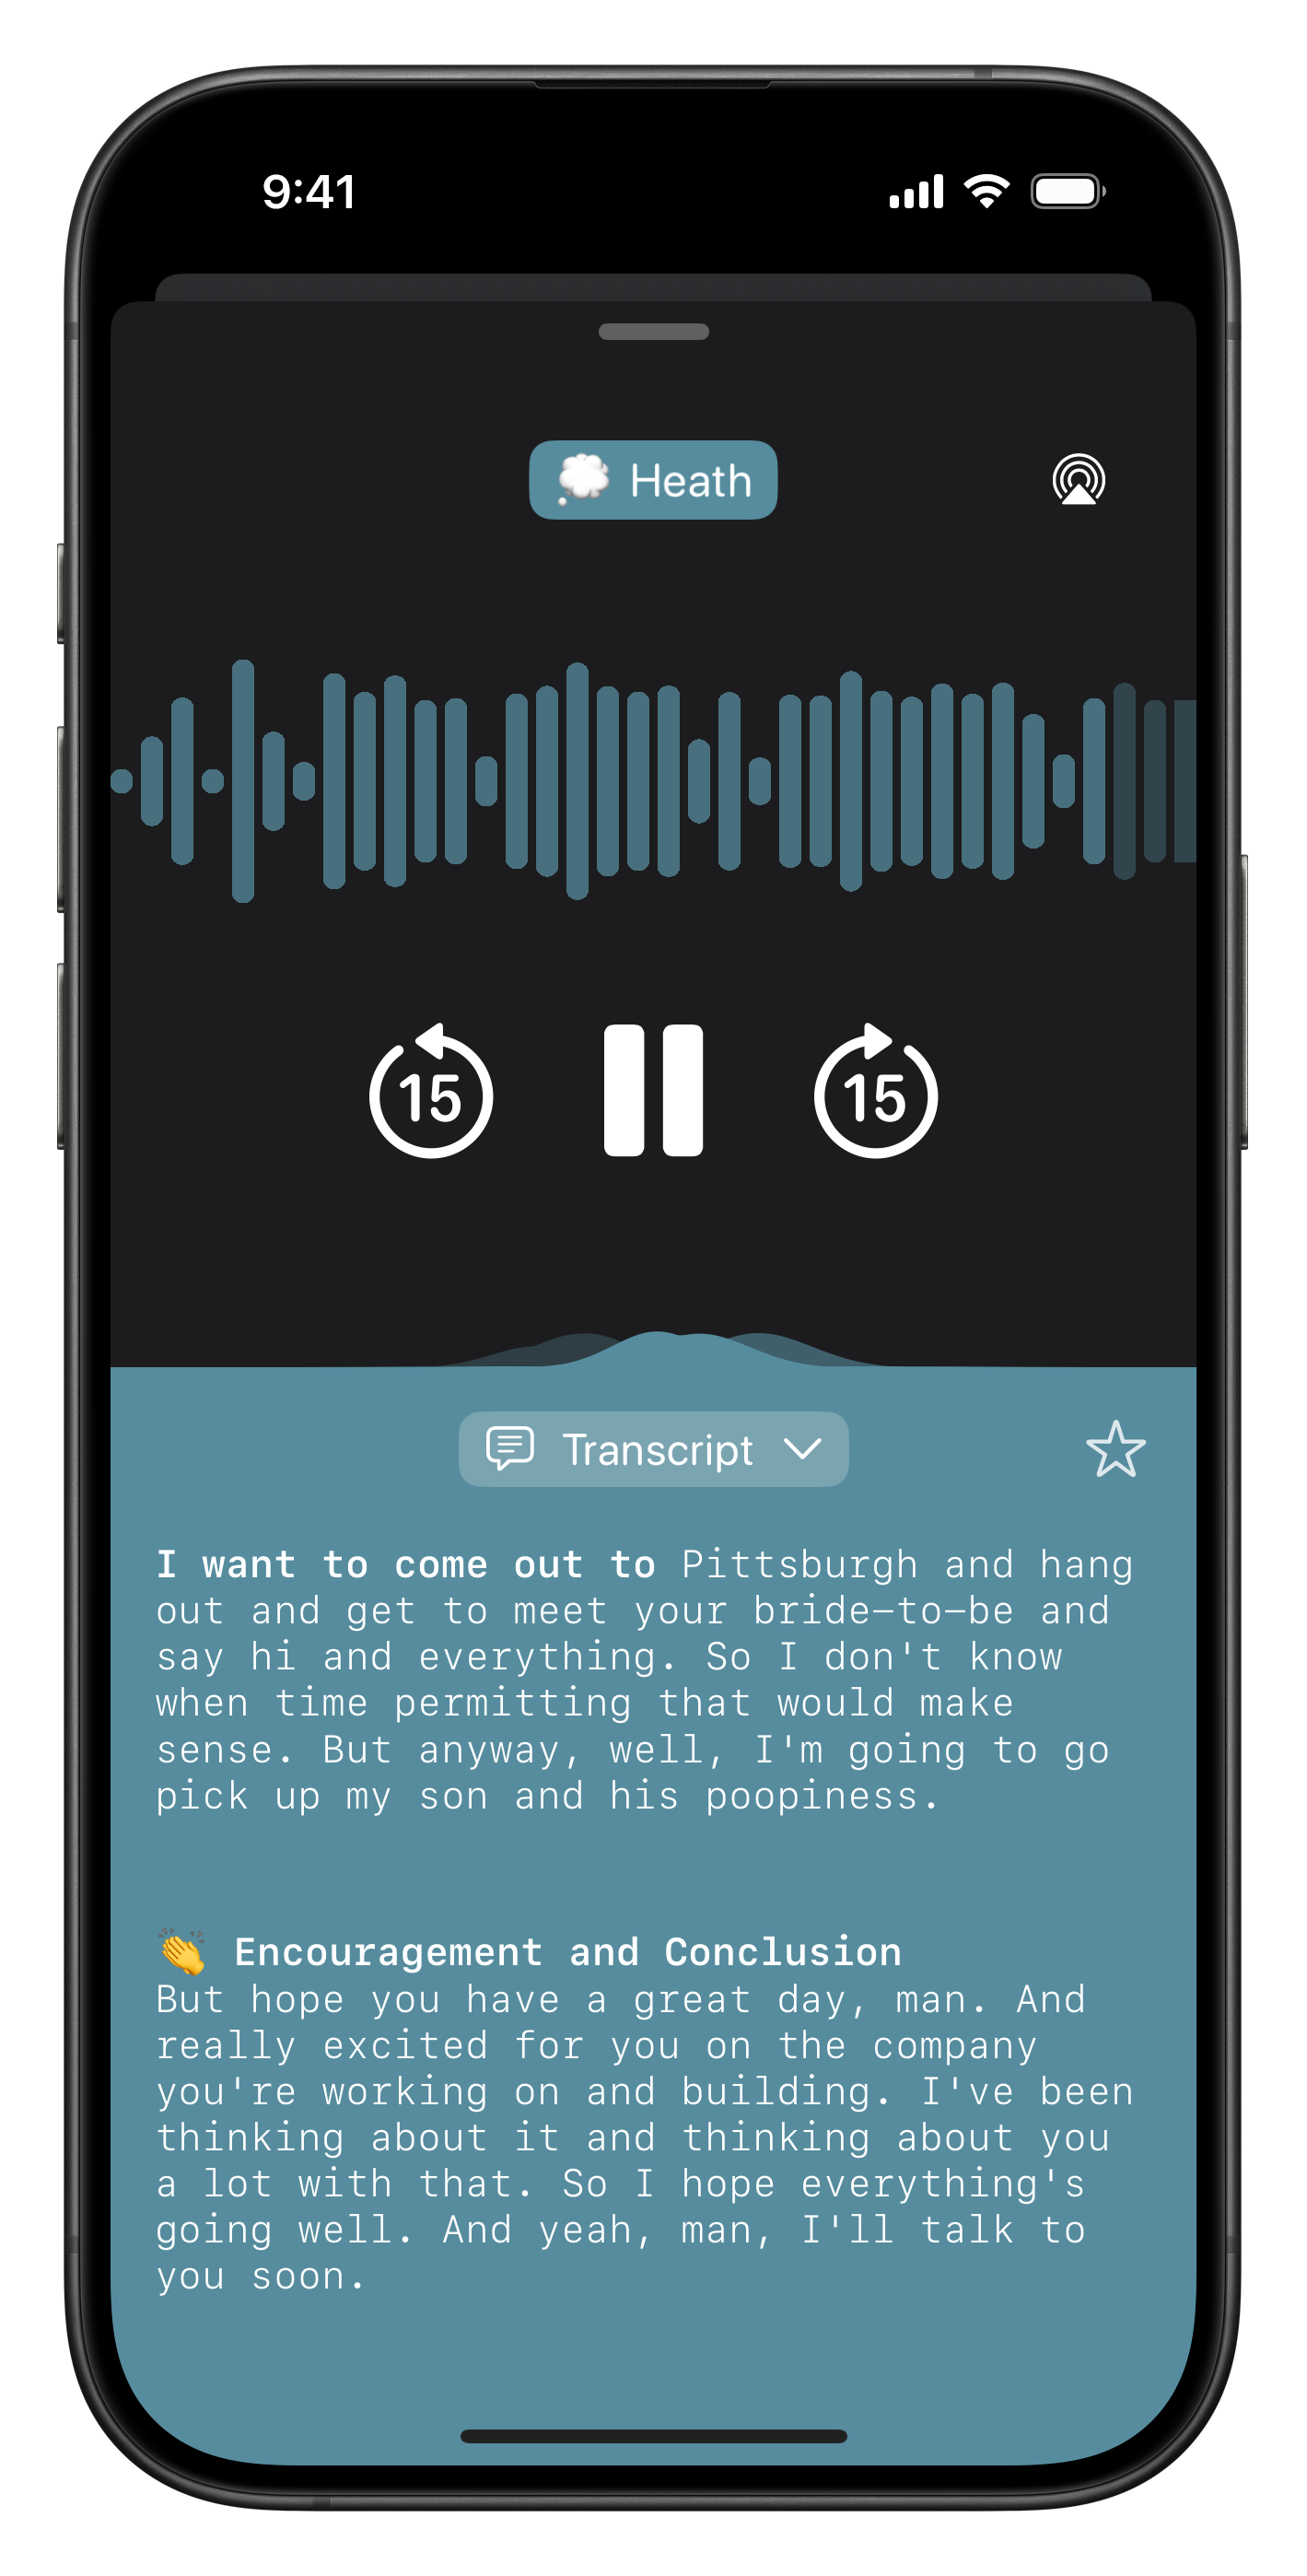 iPhone showing an audio message and transcript from Heath